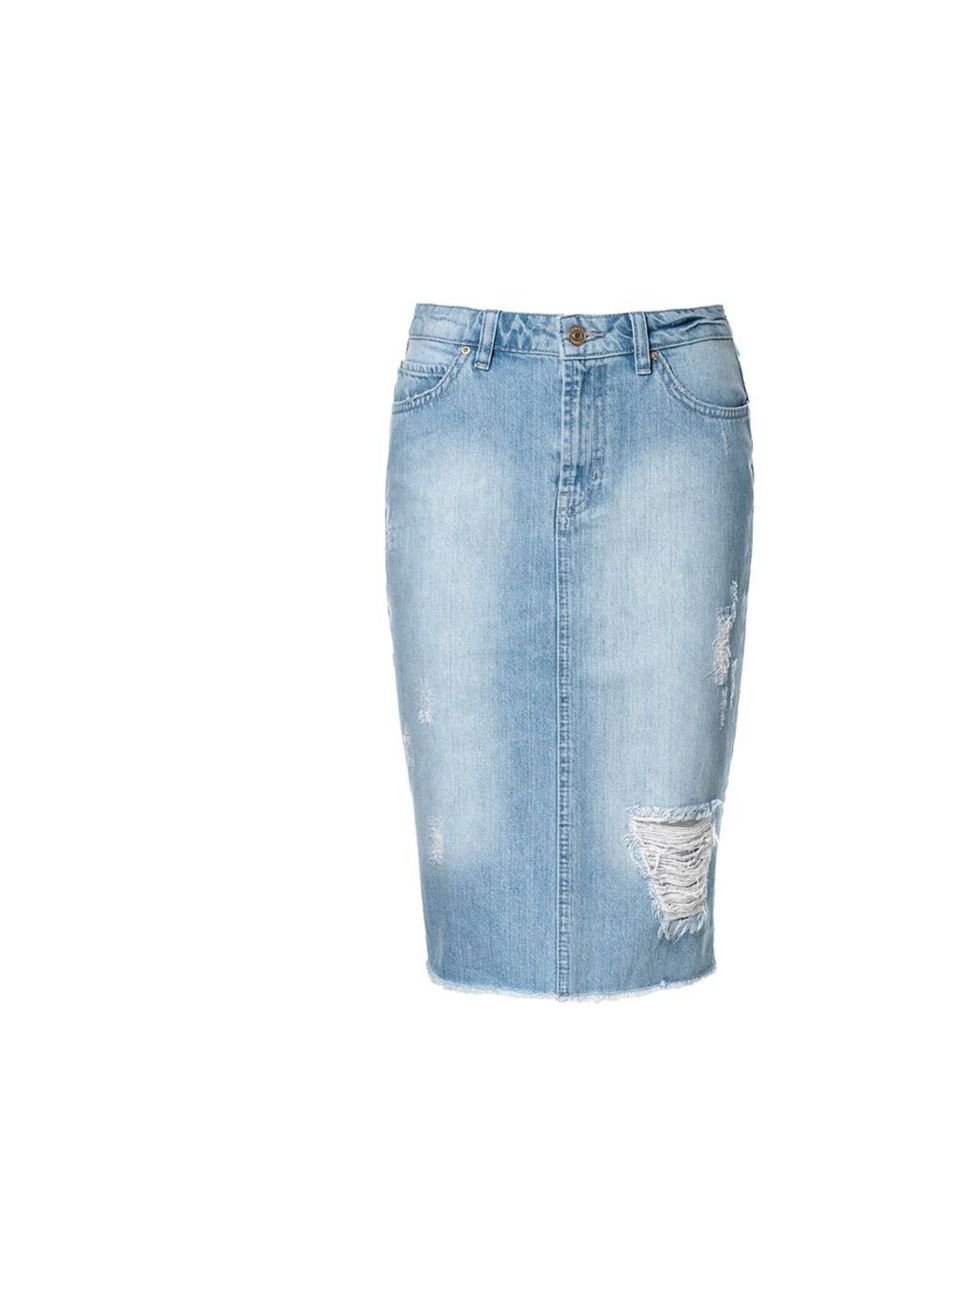 <p>A distressed denim skirt can be dressed down with loafers and up with ankle strap sandals <a href="http://www.zara.com/webapp/wcs/stores/servlet/product/uk/en/zara-neu-S2013/358006/1220508/RIPPED+DENIM+PENCIL+SKIRT">Zara</a> ripped denim pencil skirt,